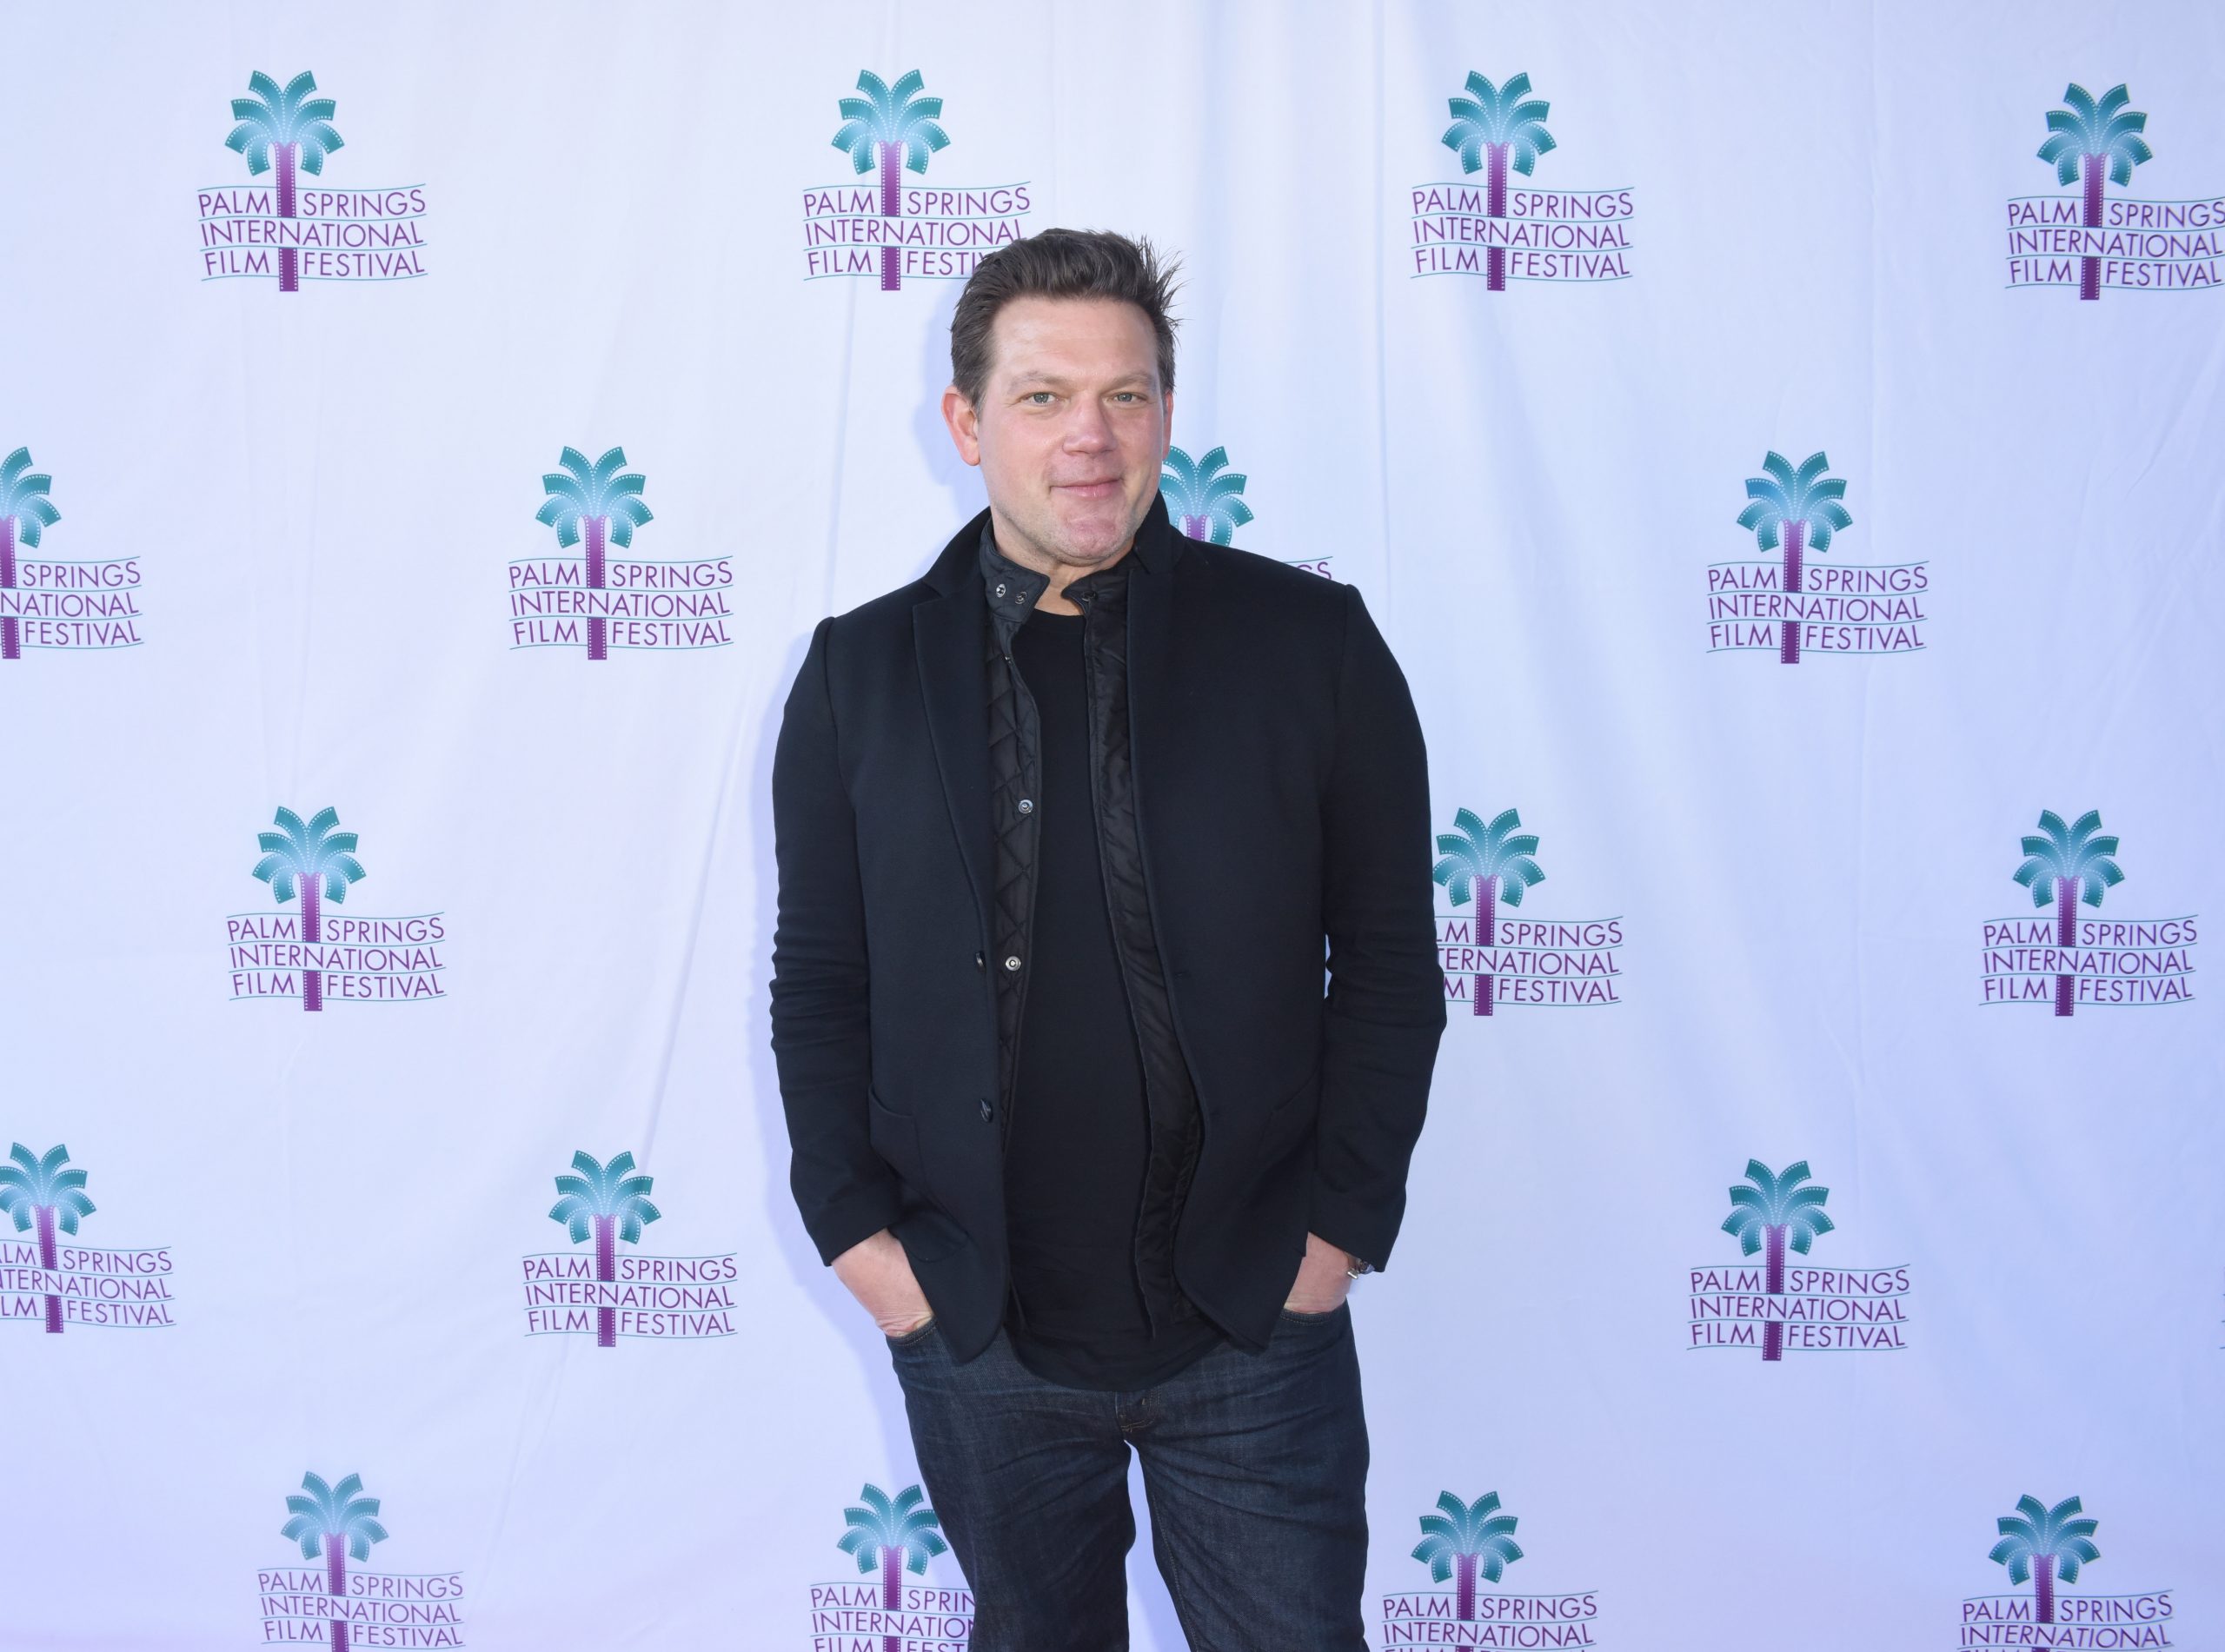 Food Network star Tyler Florence wears a dark-colored jacket and shirt in this photograph.